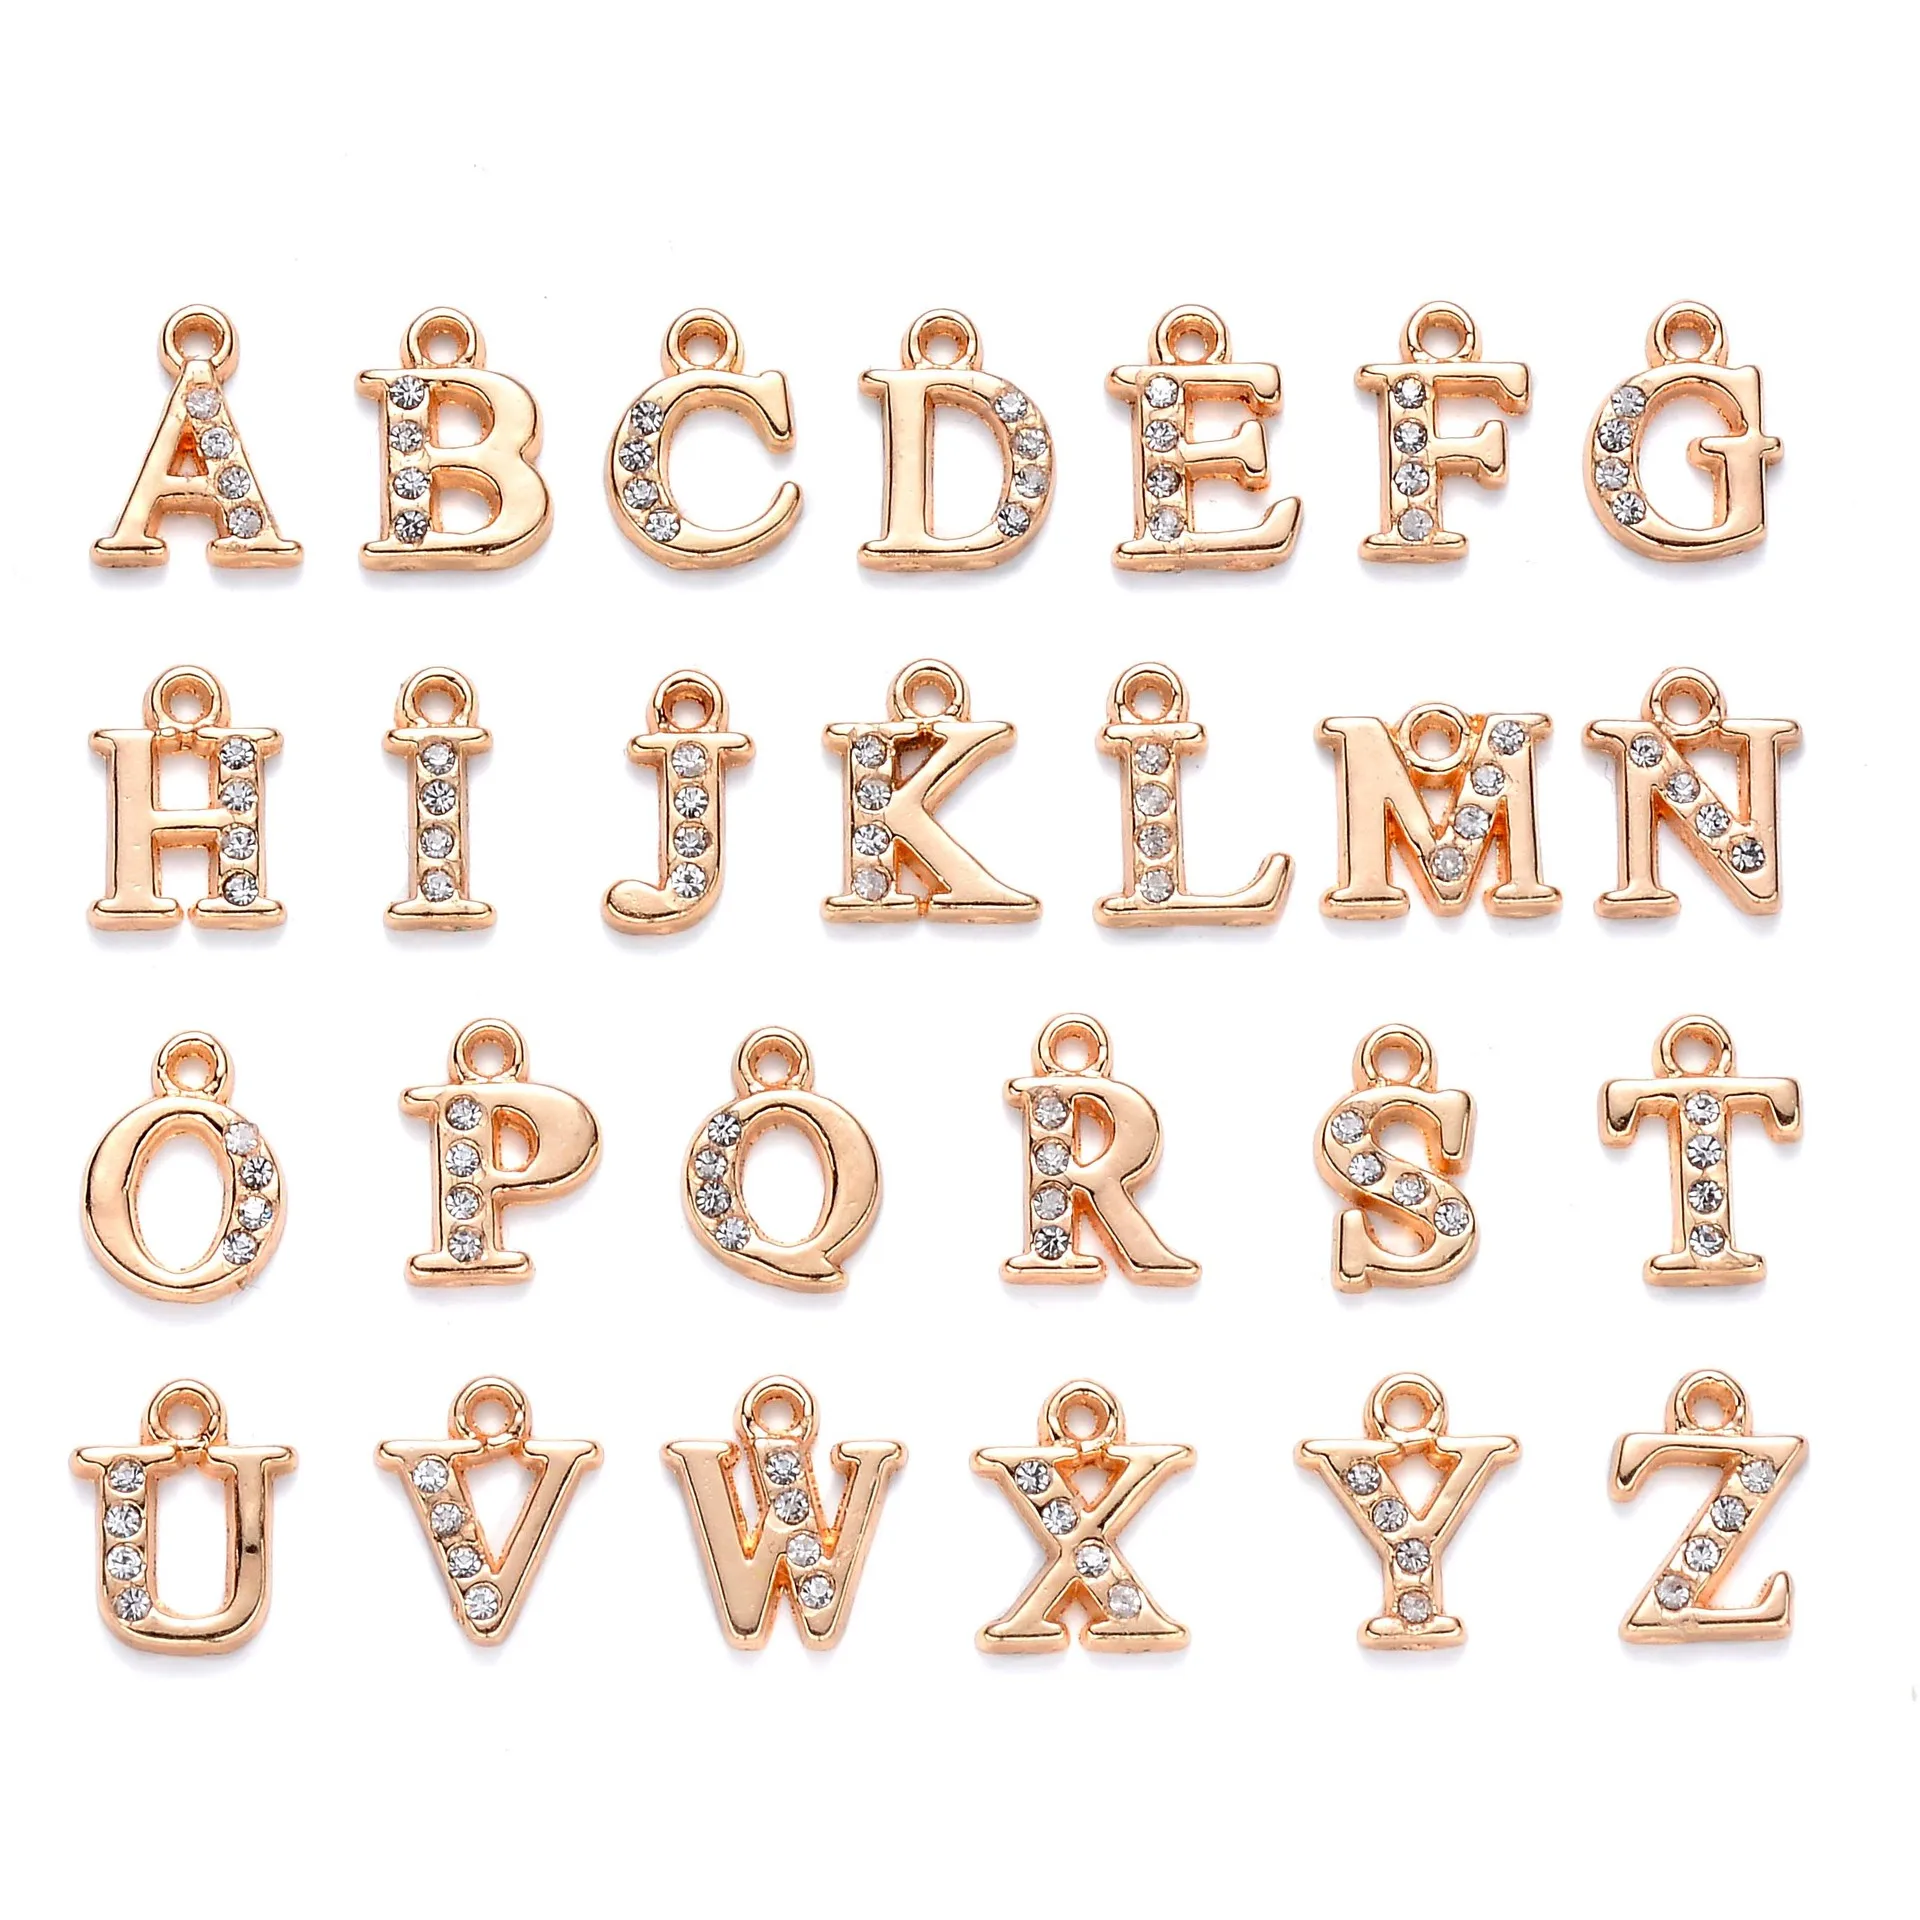 

26pcs Random Mixed Shape Ancient Letters Charms KC Gold 26 Letter Pendants For DIY Necklace Keychain Jewelry Gifts Making Tools